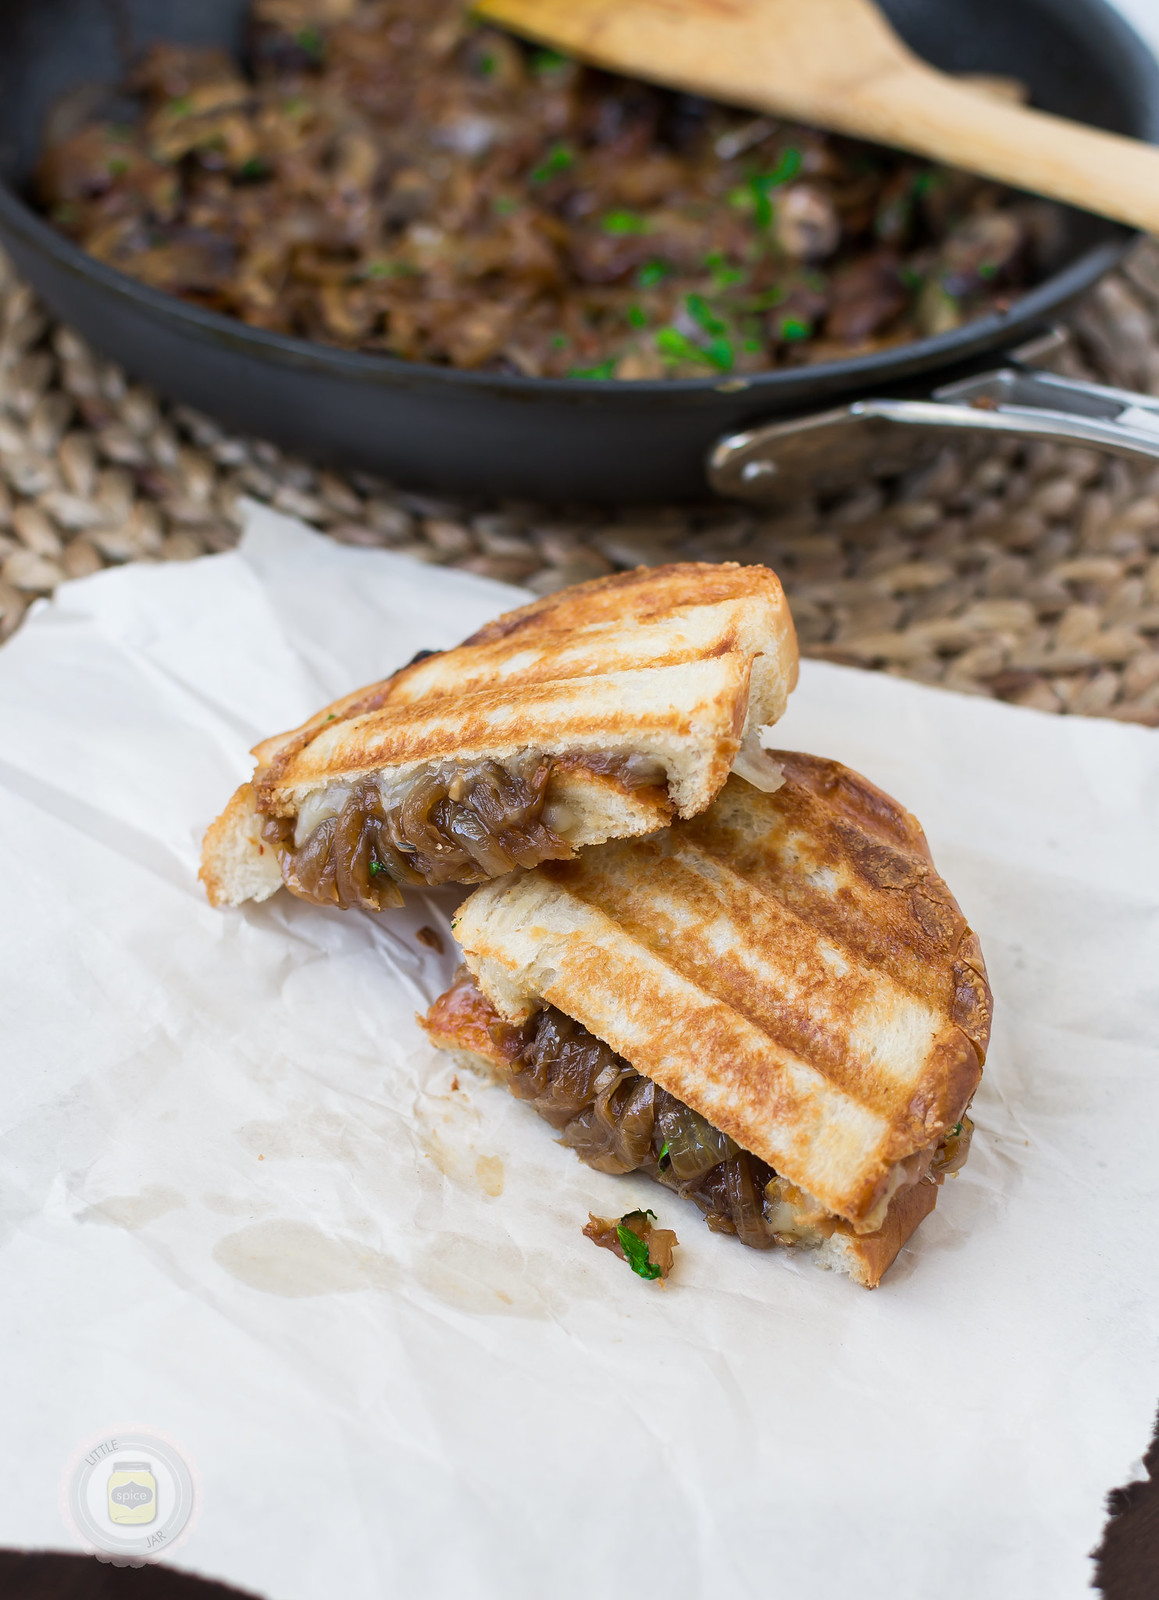 Caramelized Onion and Baby Bella Panini Melt on paper